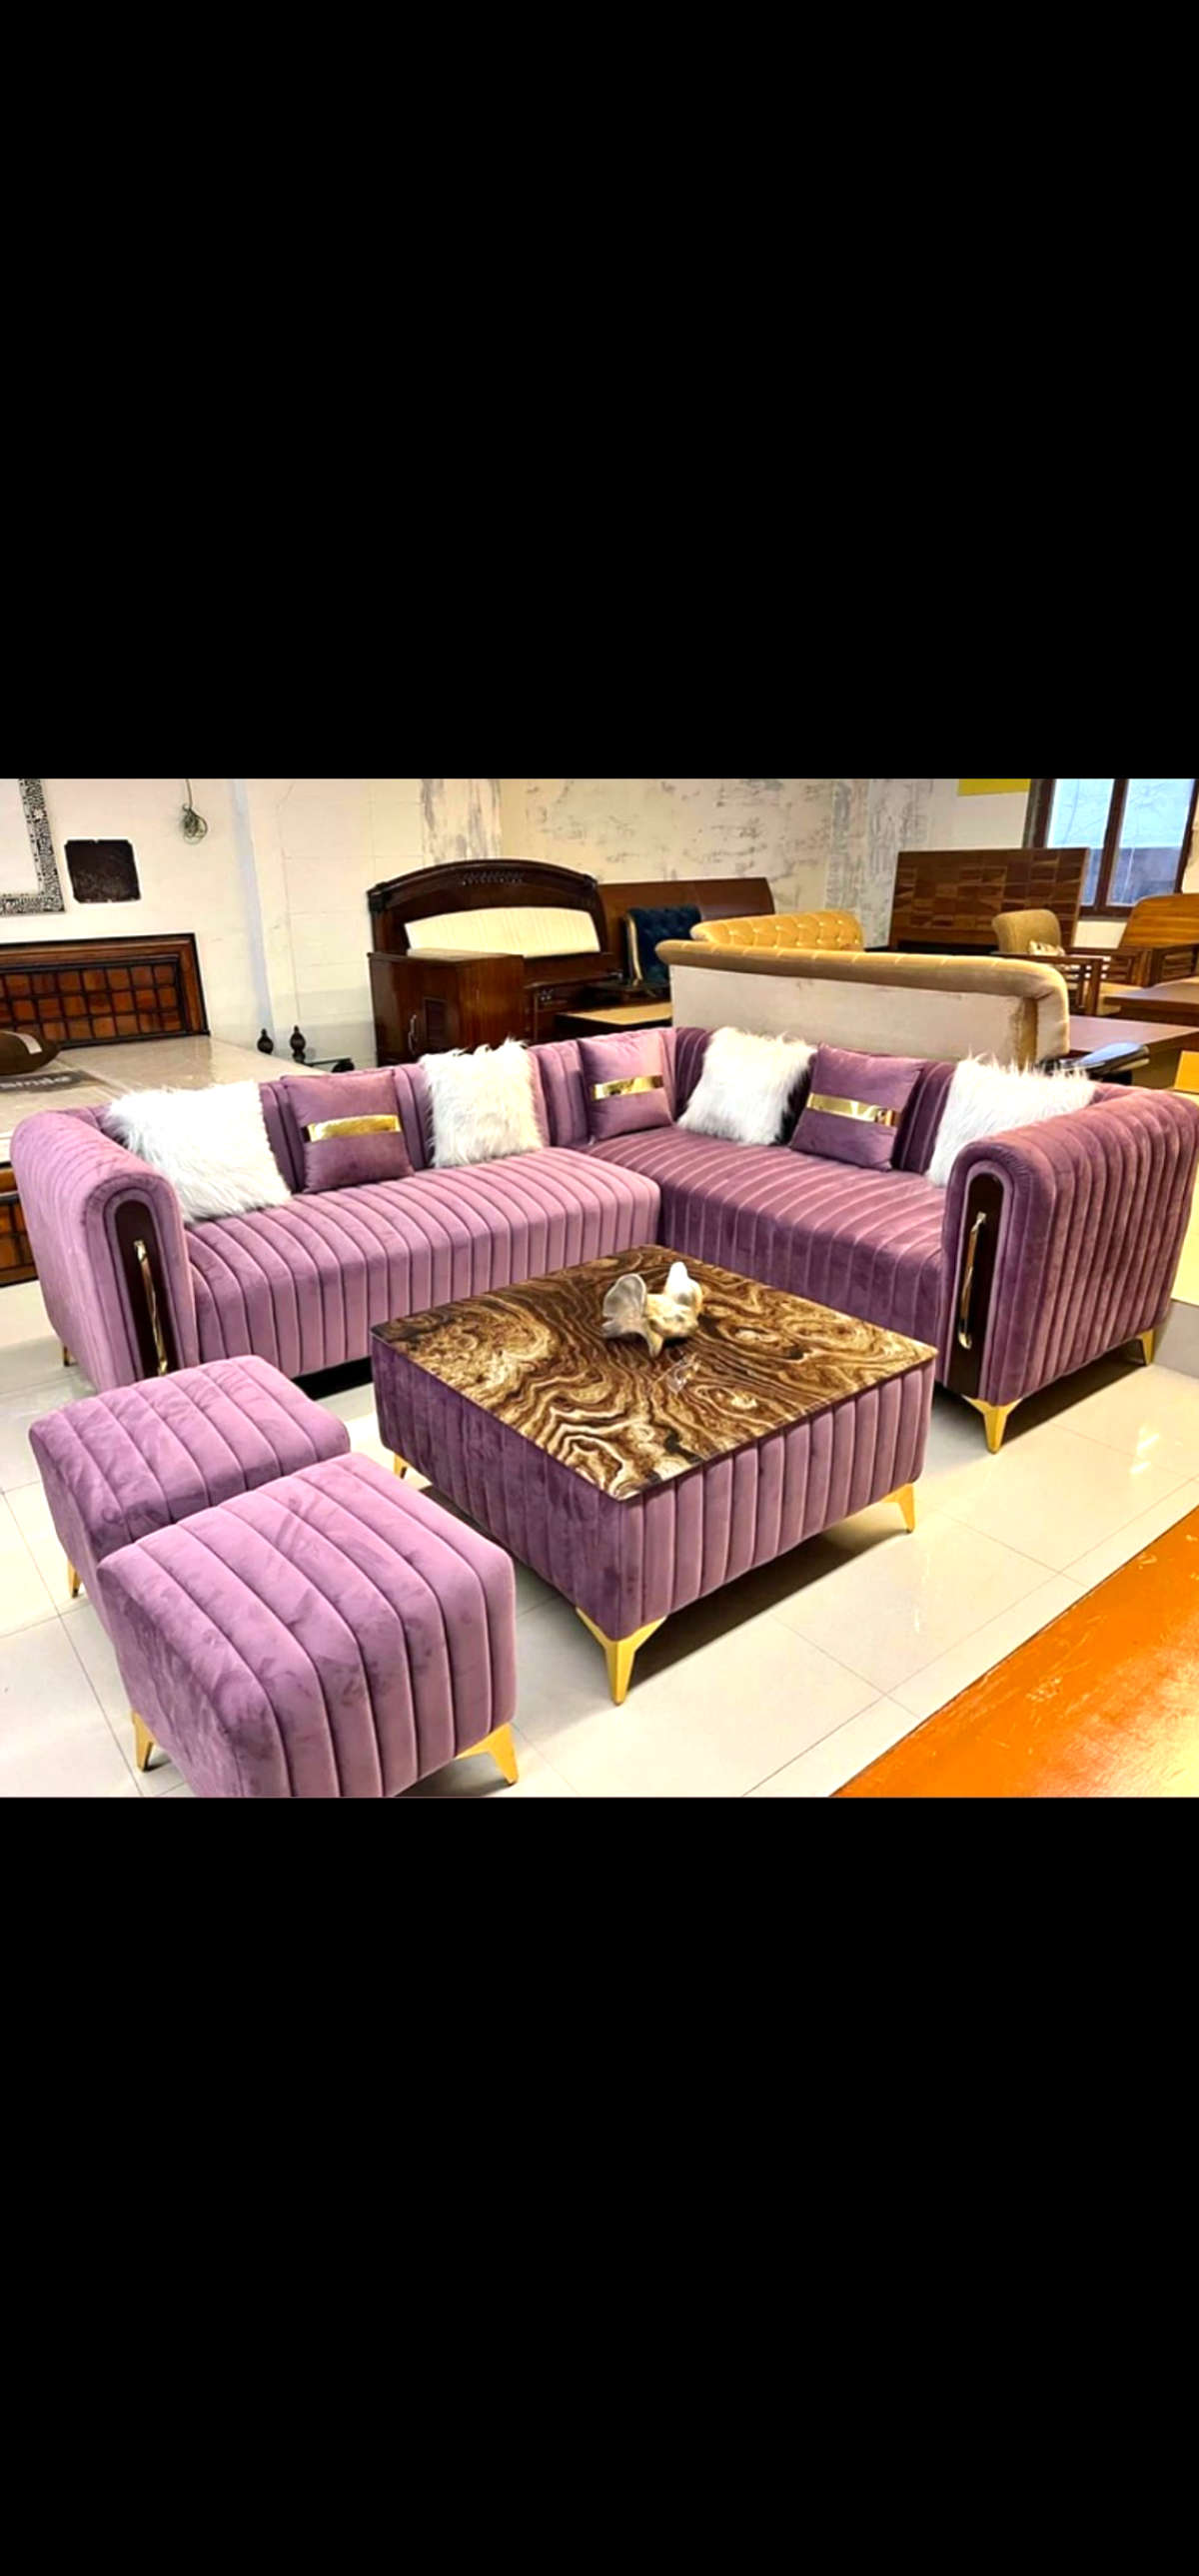 Designs by Building Supplies Royal Furnishing, Indore | Kolo